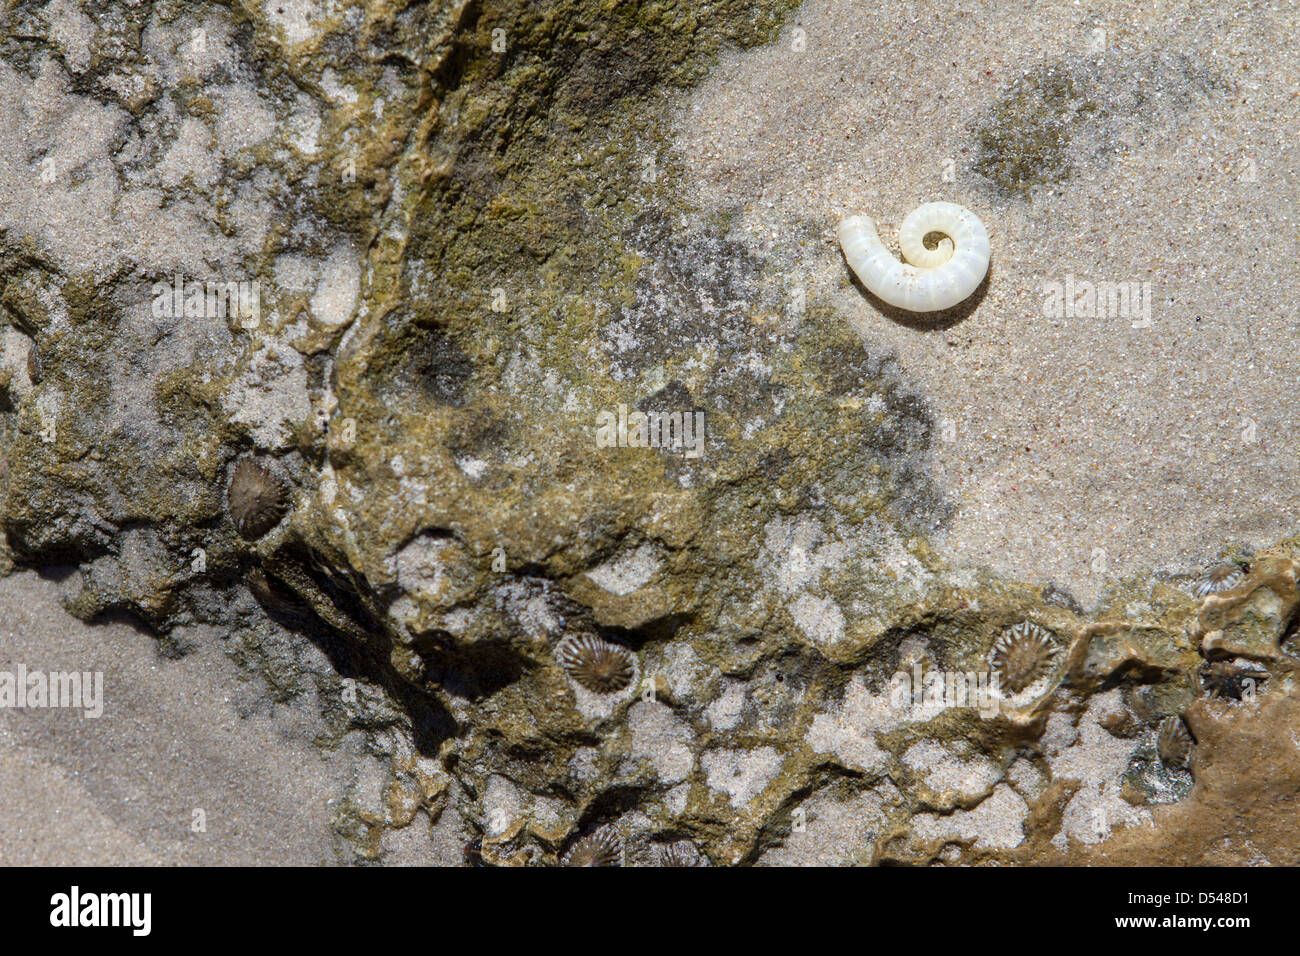 Shell on stone and sand. Stock Photo